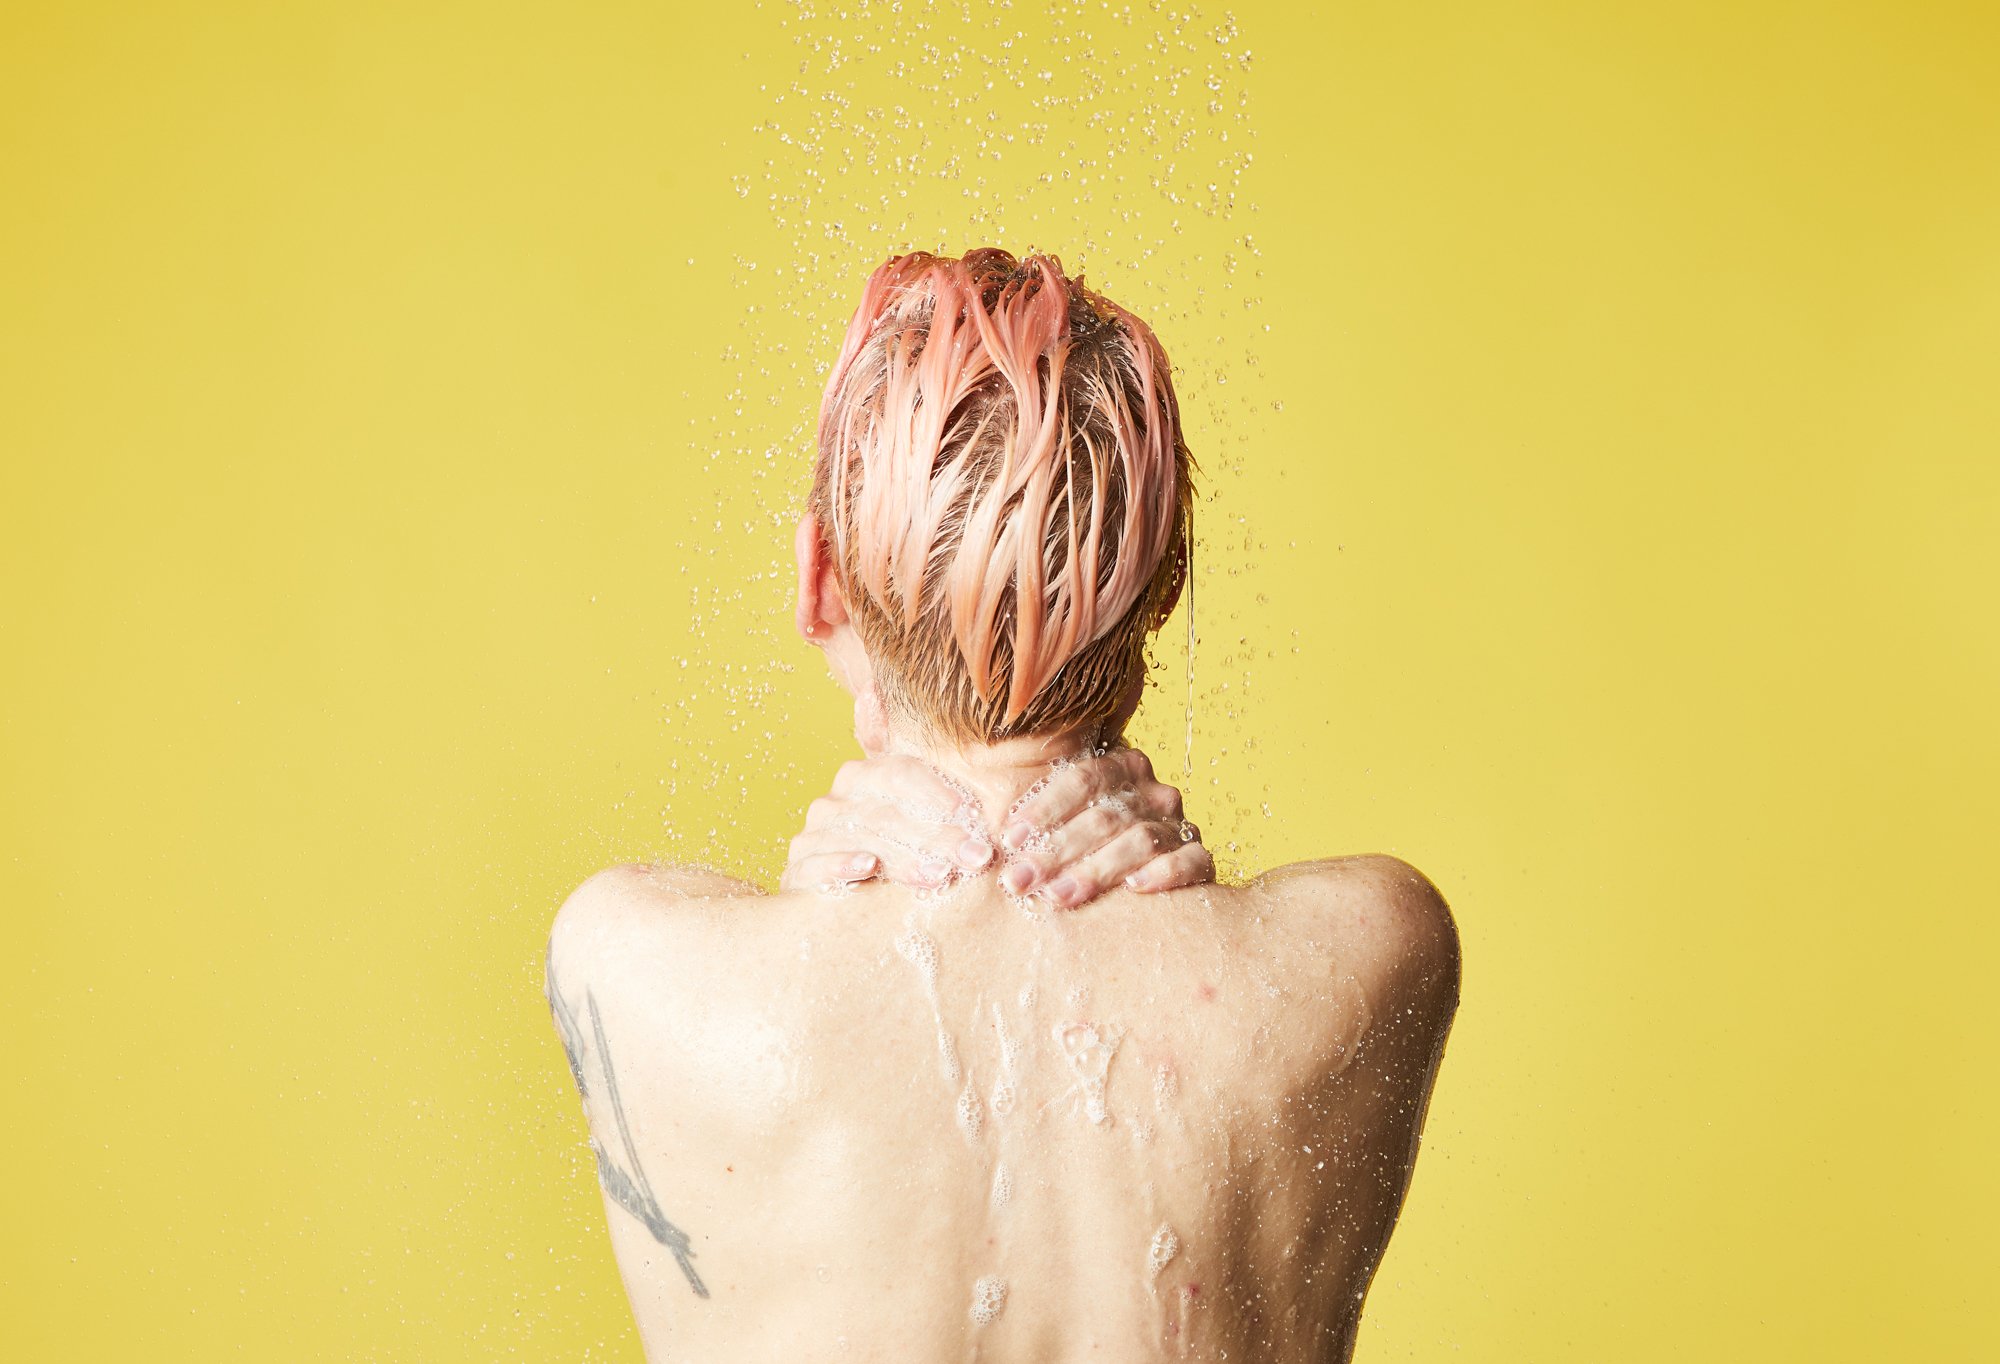 A model stands with upper back and head shown, lather running down from hands over their neck, in front of a yellow background.